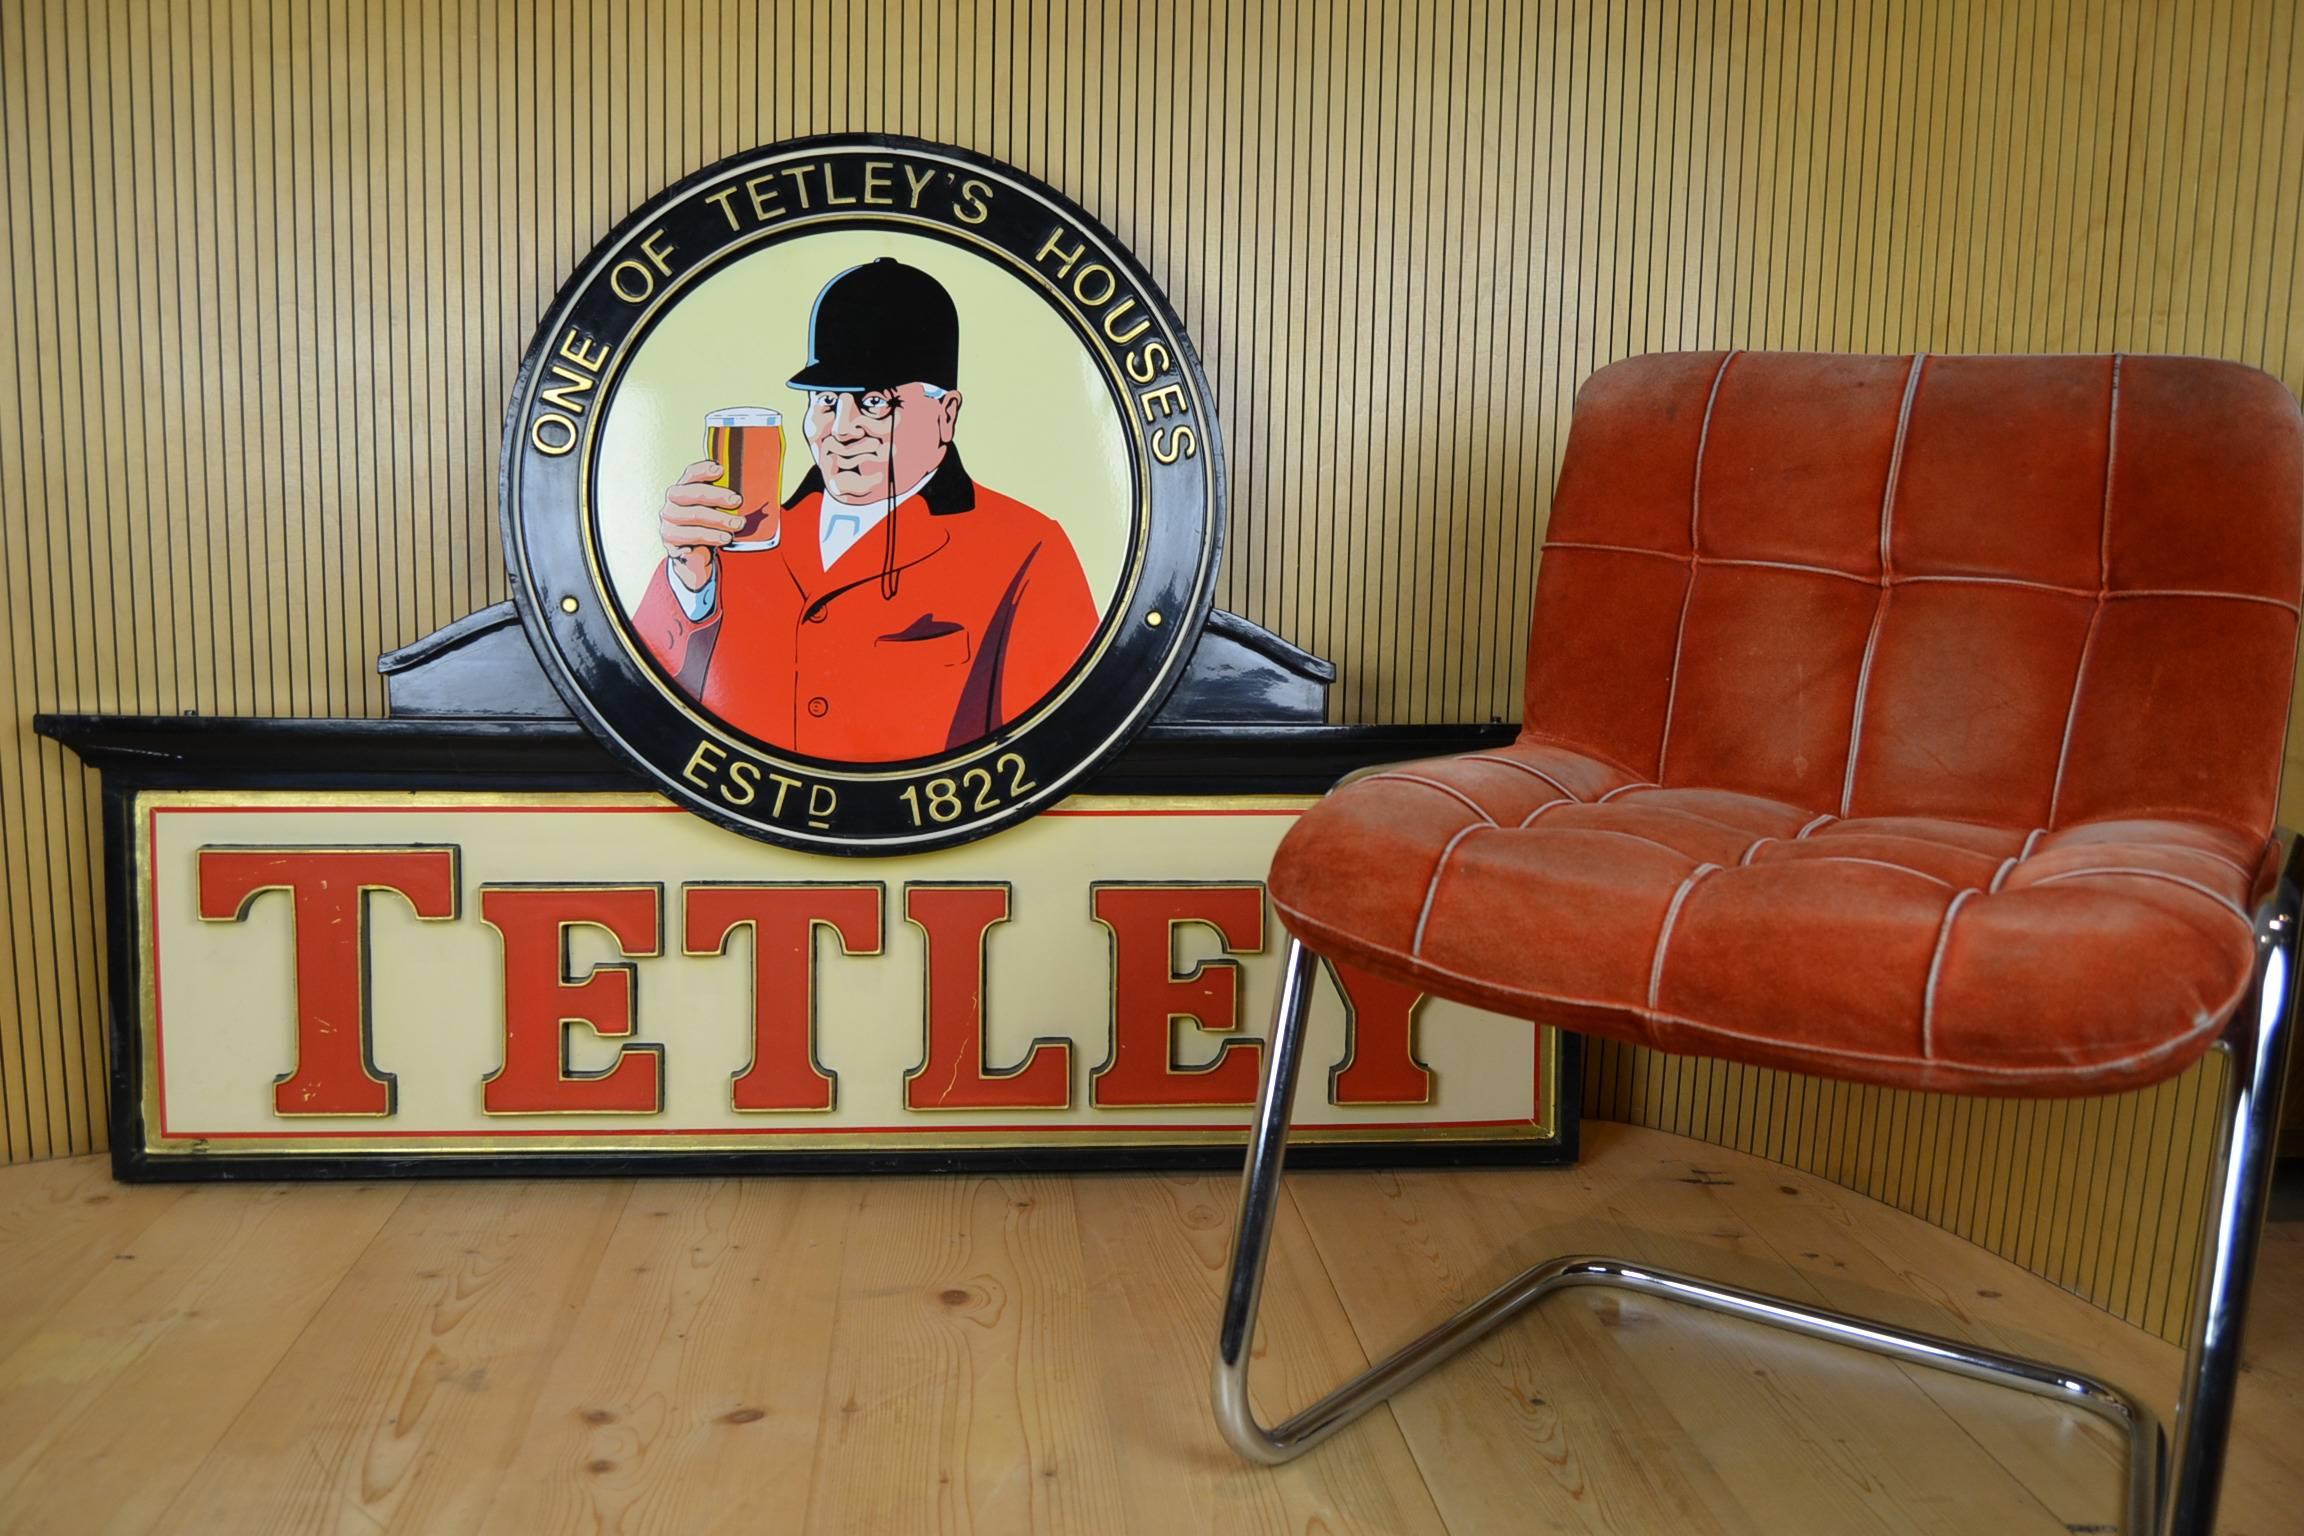 Great large outdoor Tetley Pub enamel sign. 
Impressive fiberglass sign with enamel - porcelain sign of the rider - huntsman in the middle.
These English pub signs were produced in the 1960s.
Vintage collectable advertising wall sign Tetley beer